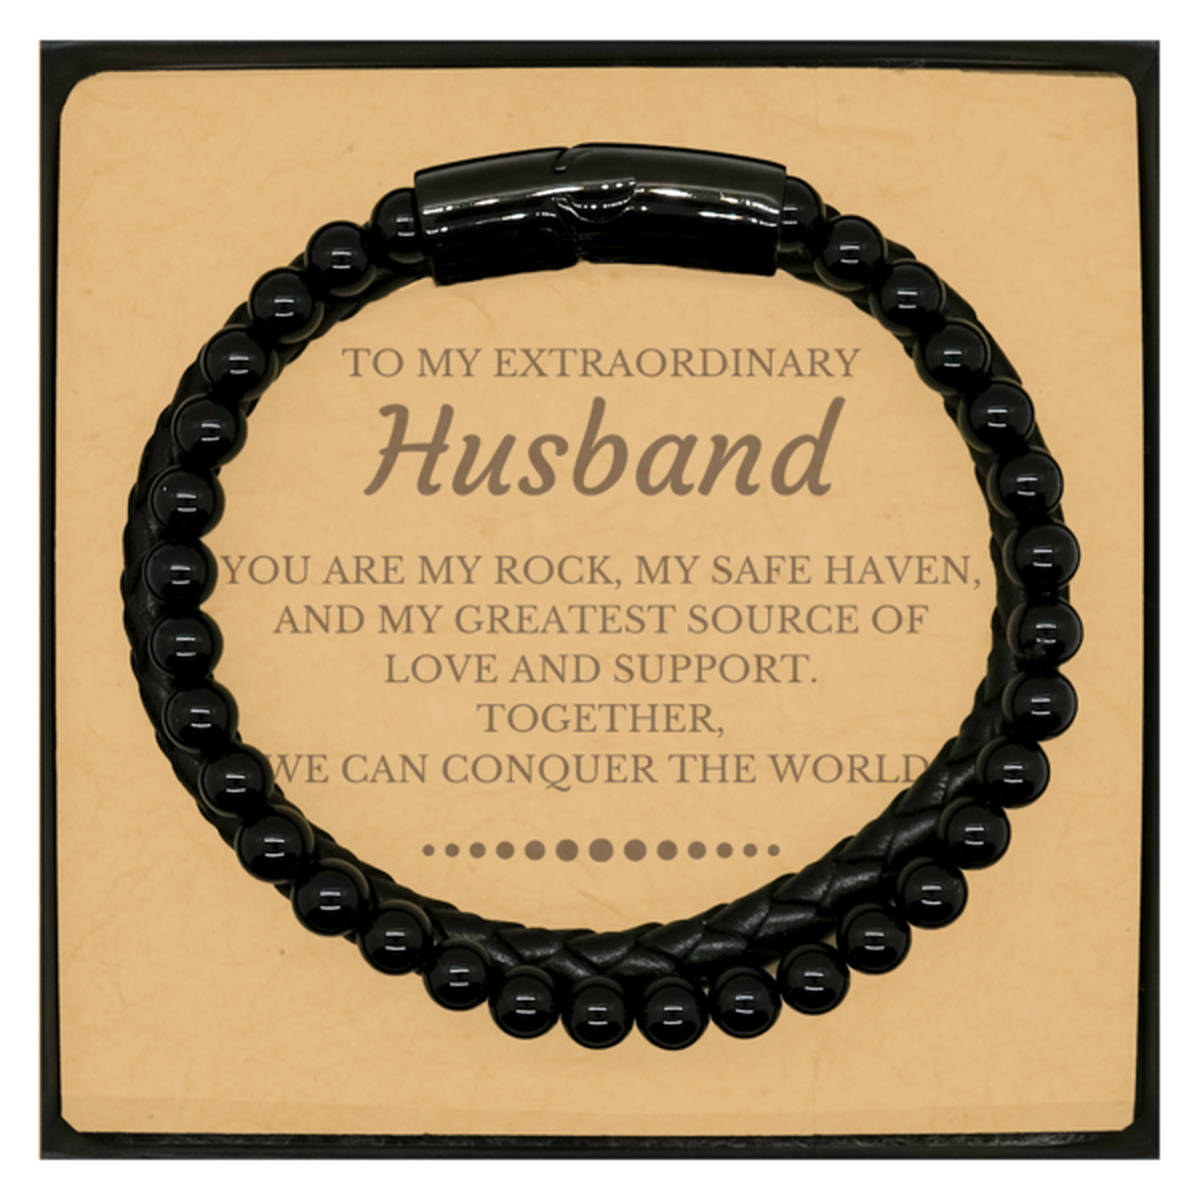 To My Extraordinary Husband Gifts, Together, we can conquer the world, Birthday Christmas Stone Leather Bracelets For Husband, Christmas Gifts For Husband